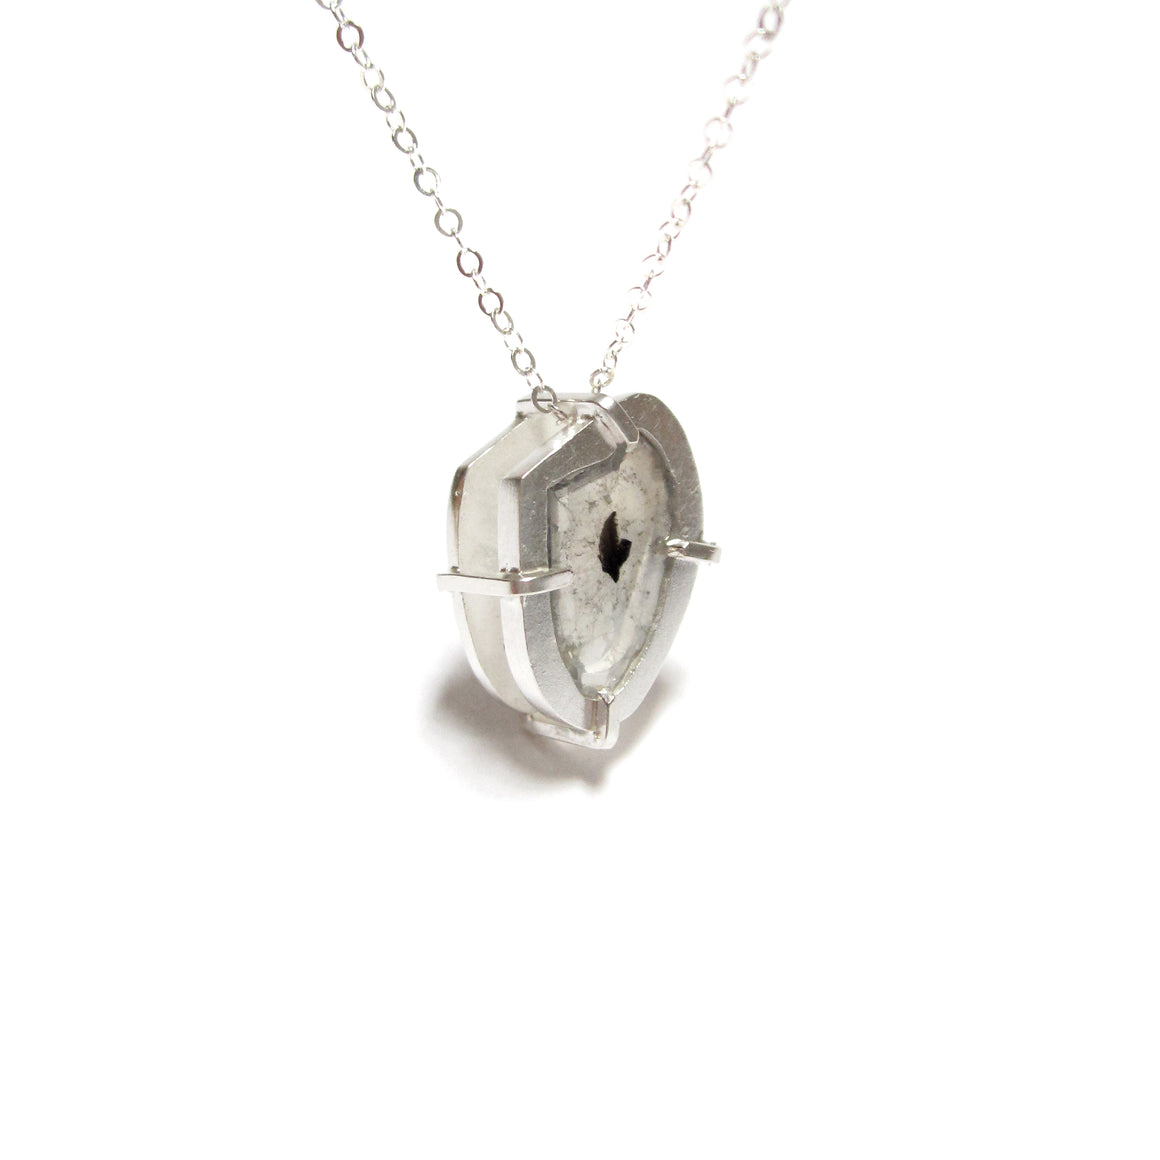 handmade, sterling silver, diamond slice, one of a kind necklace by Seth Papac